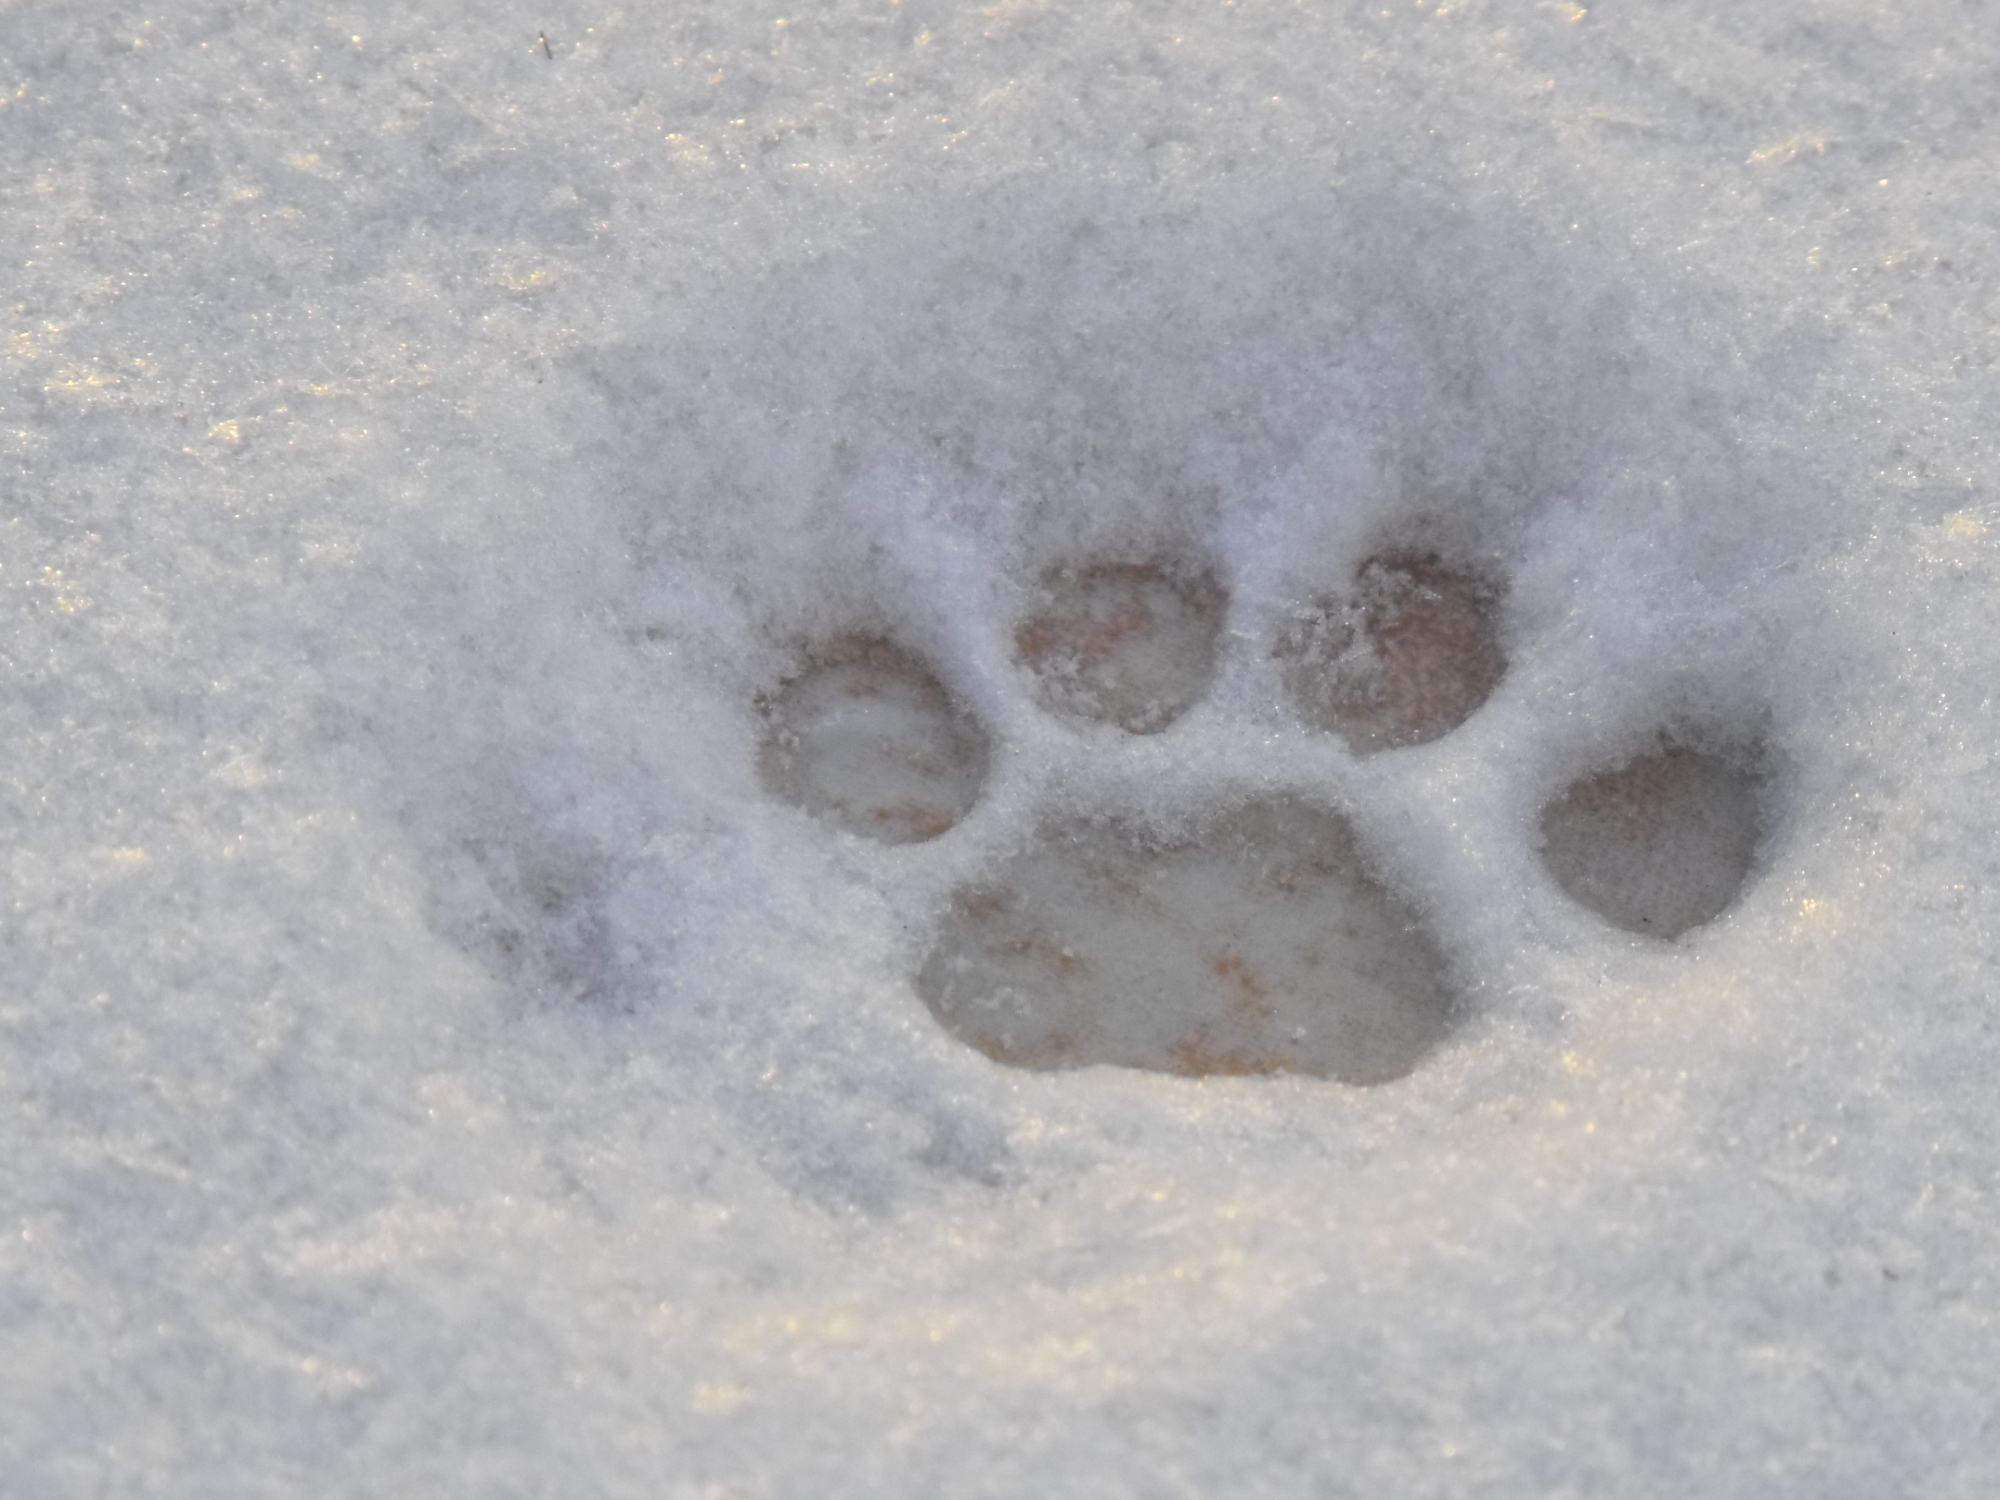 Cat Paws in snow by DracoLunarisIgnitus on DeviantArt